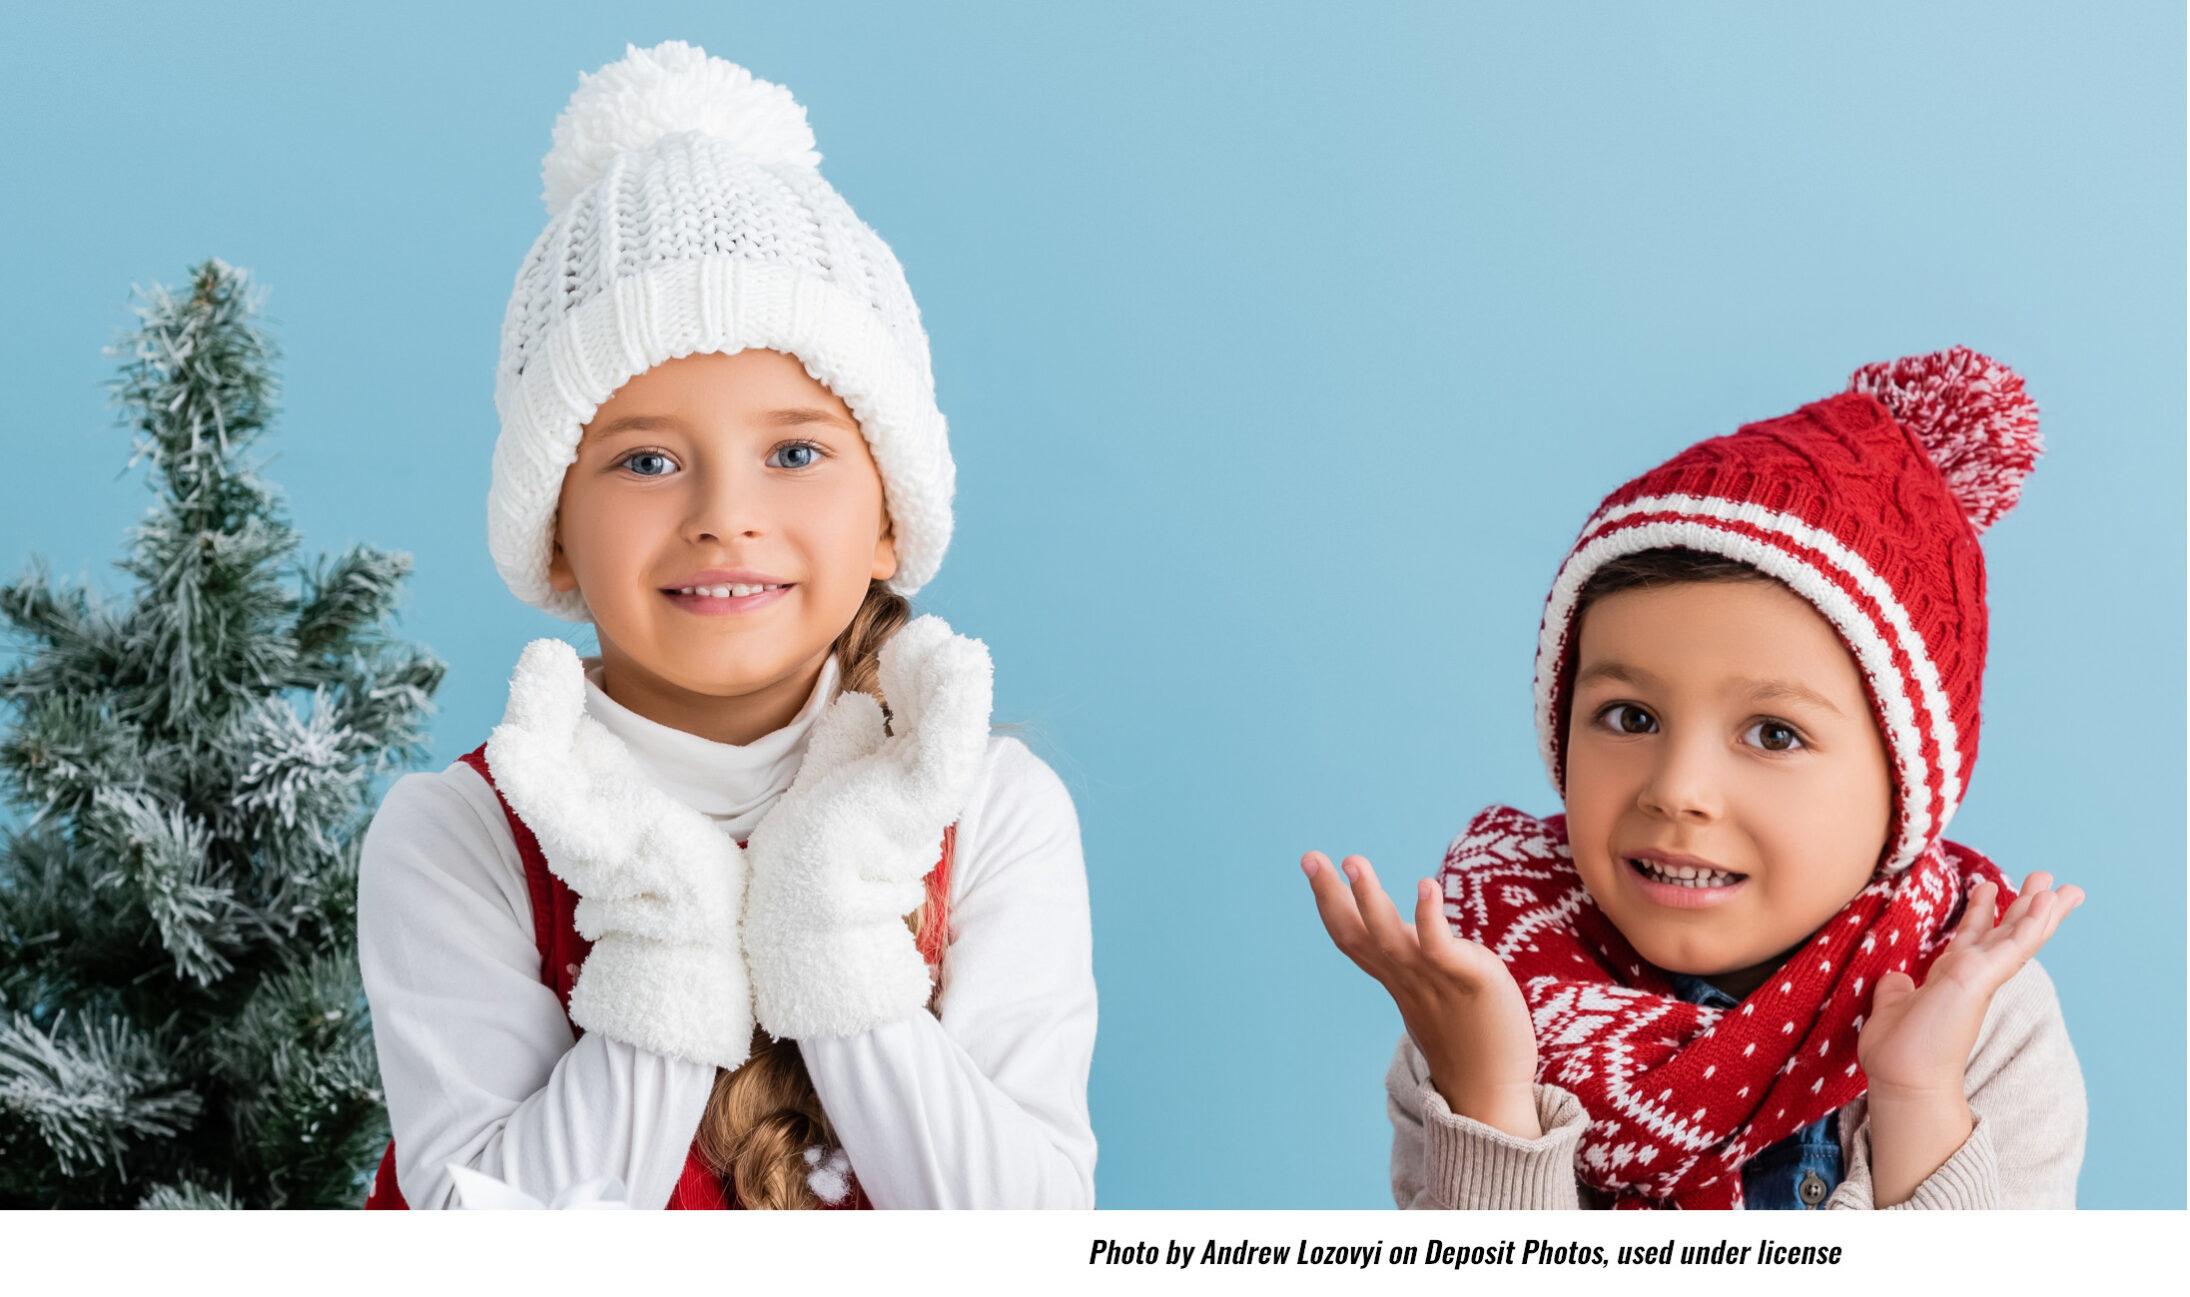 Hats, Scarves, and Mittens Needed for Winter Protection of child education participants